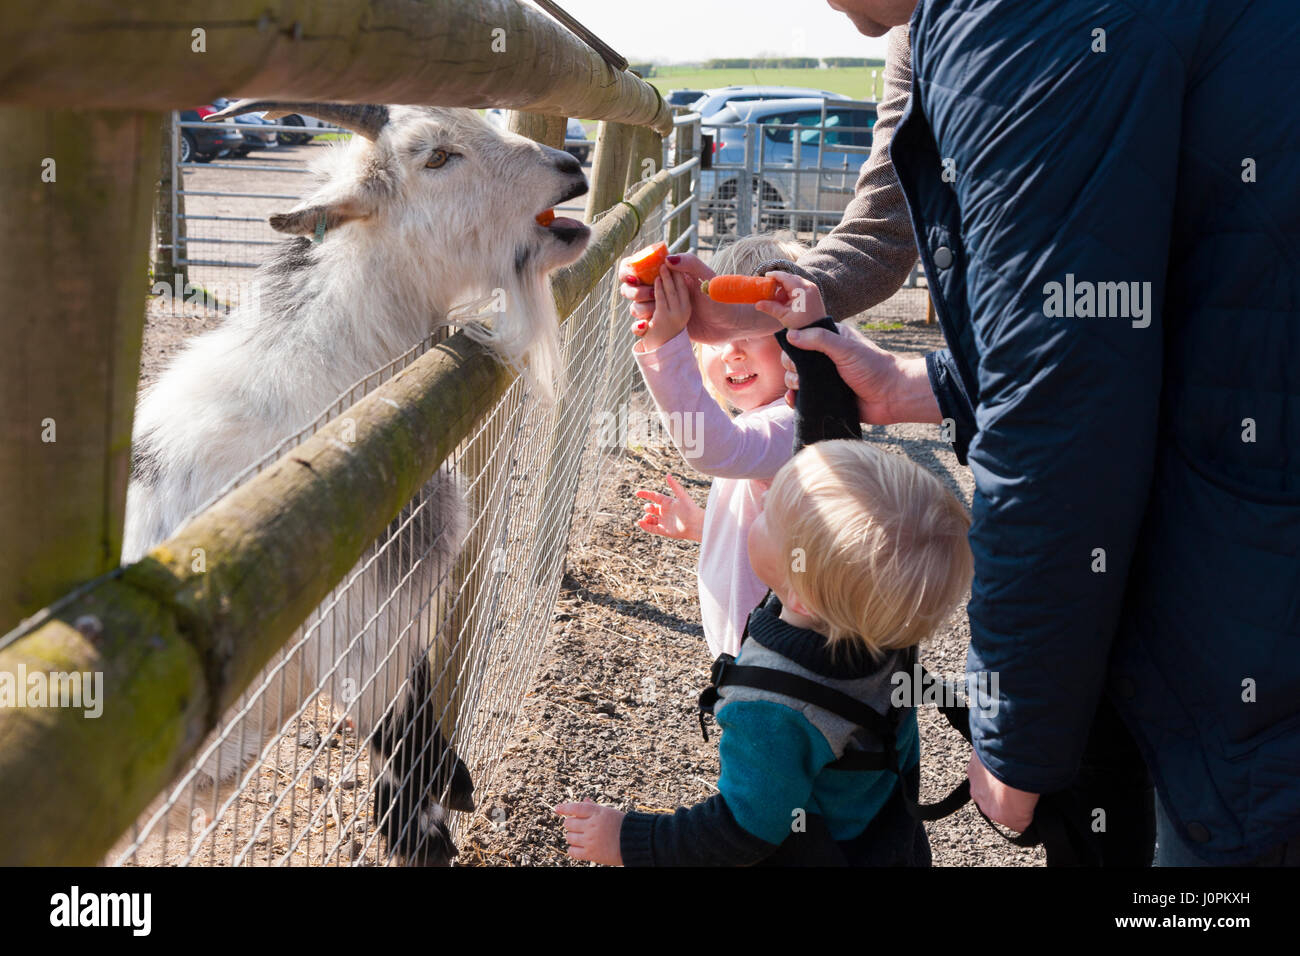 Families / visitors / people with kids / children / child feeding feeds food – carrots etc – to goats at Glebe Farm, Astbury, Congleton, Cheshire UK. Stock Photo